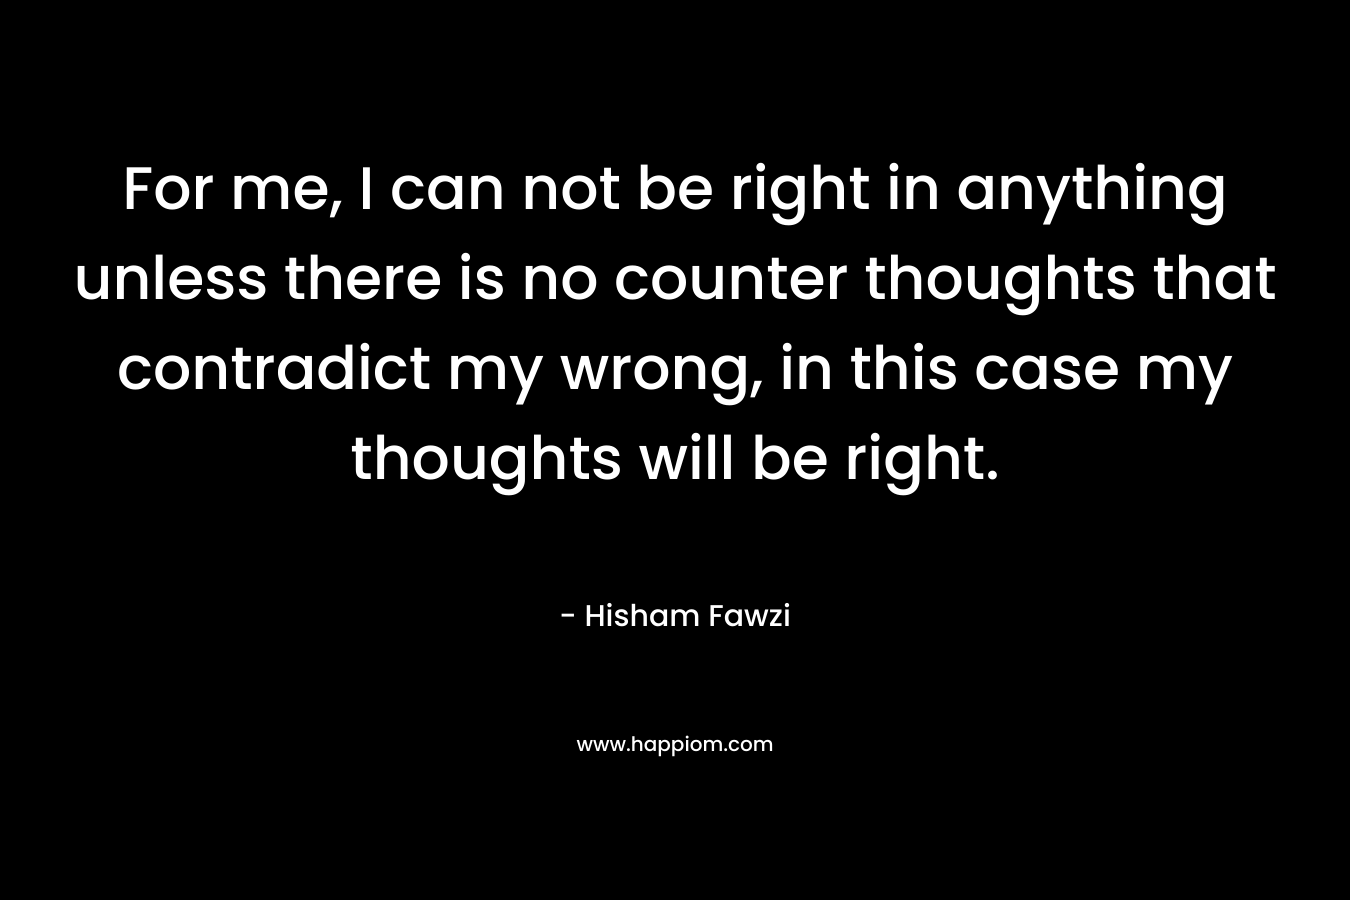 For me, I can not be right in anything unless there is no counter thoughts that contradict my wrong, in this case my thoughts will be right.